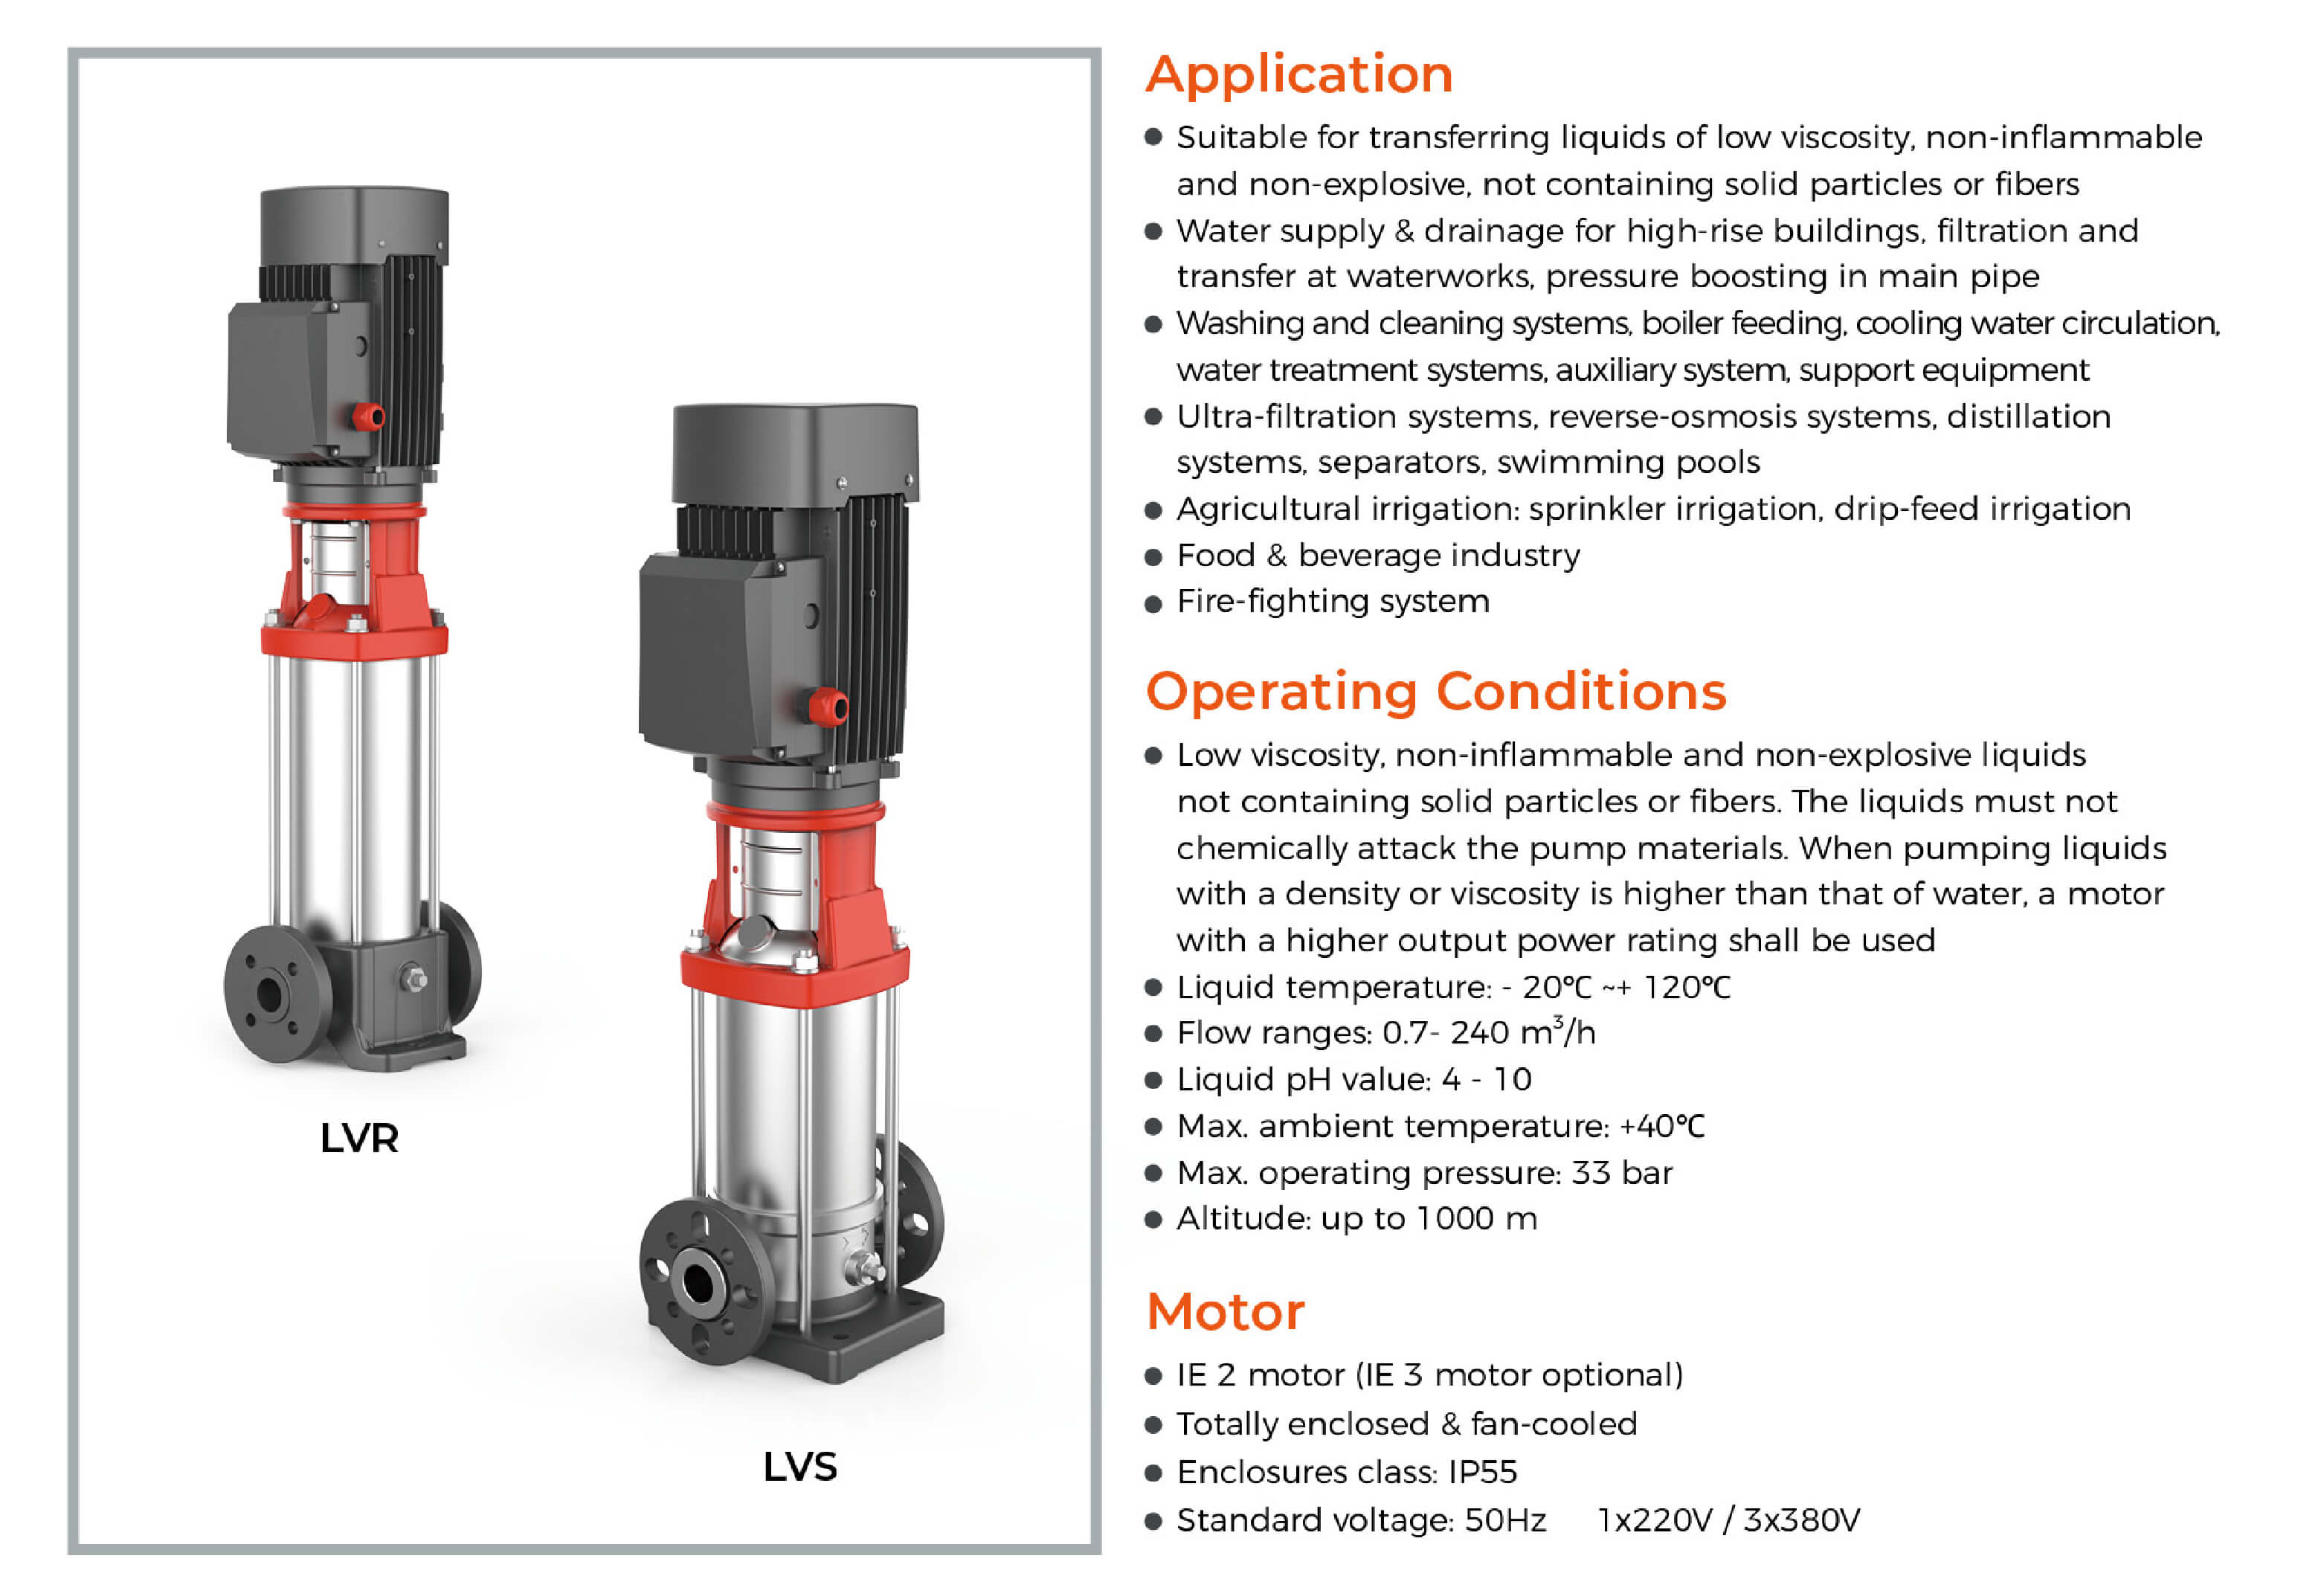 LVR LVS Stainless Steel Vertical Multistage Pump Features